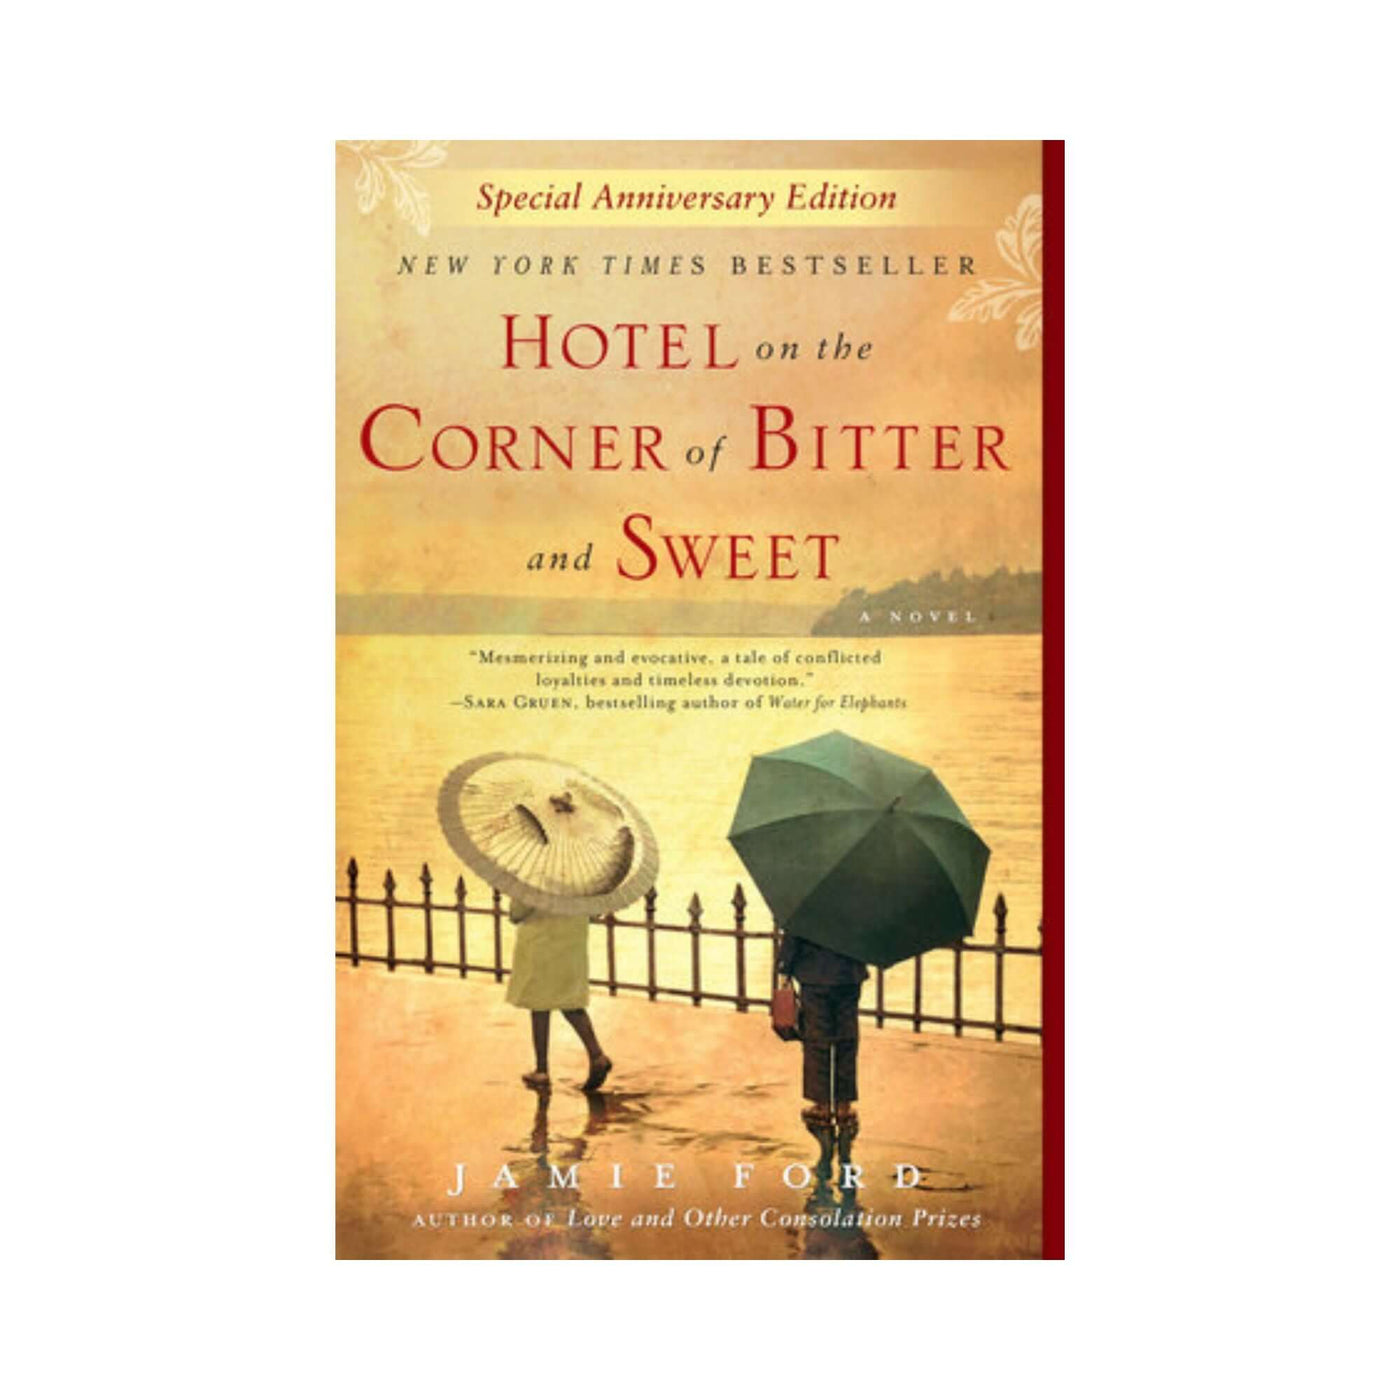 Hotel on the Corner of Bitter and Sweet by Jamie Ford (Signed Copies)